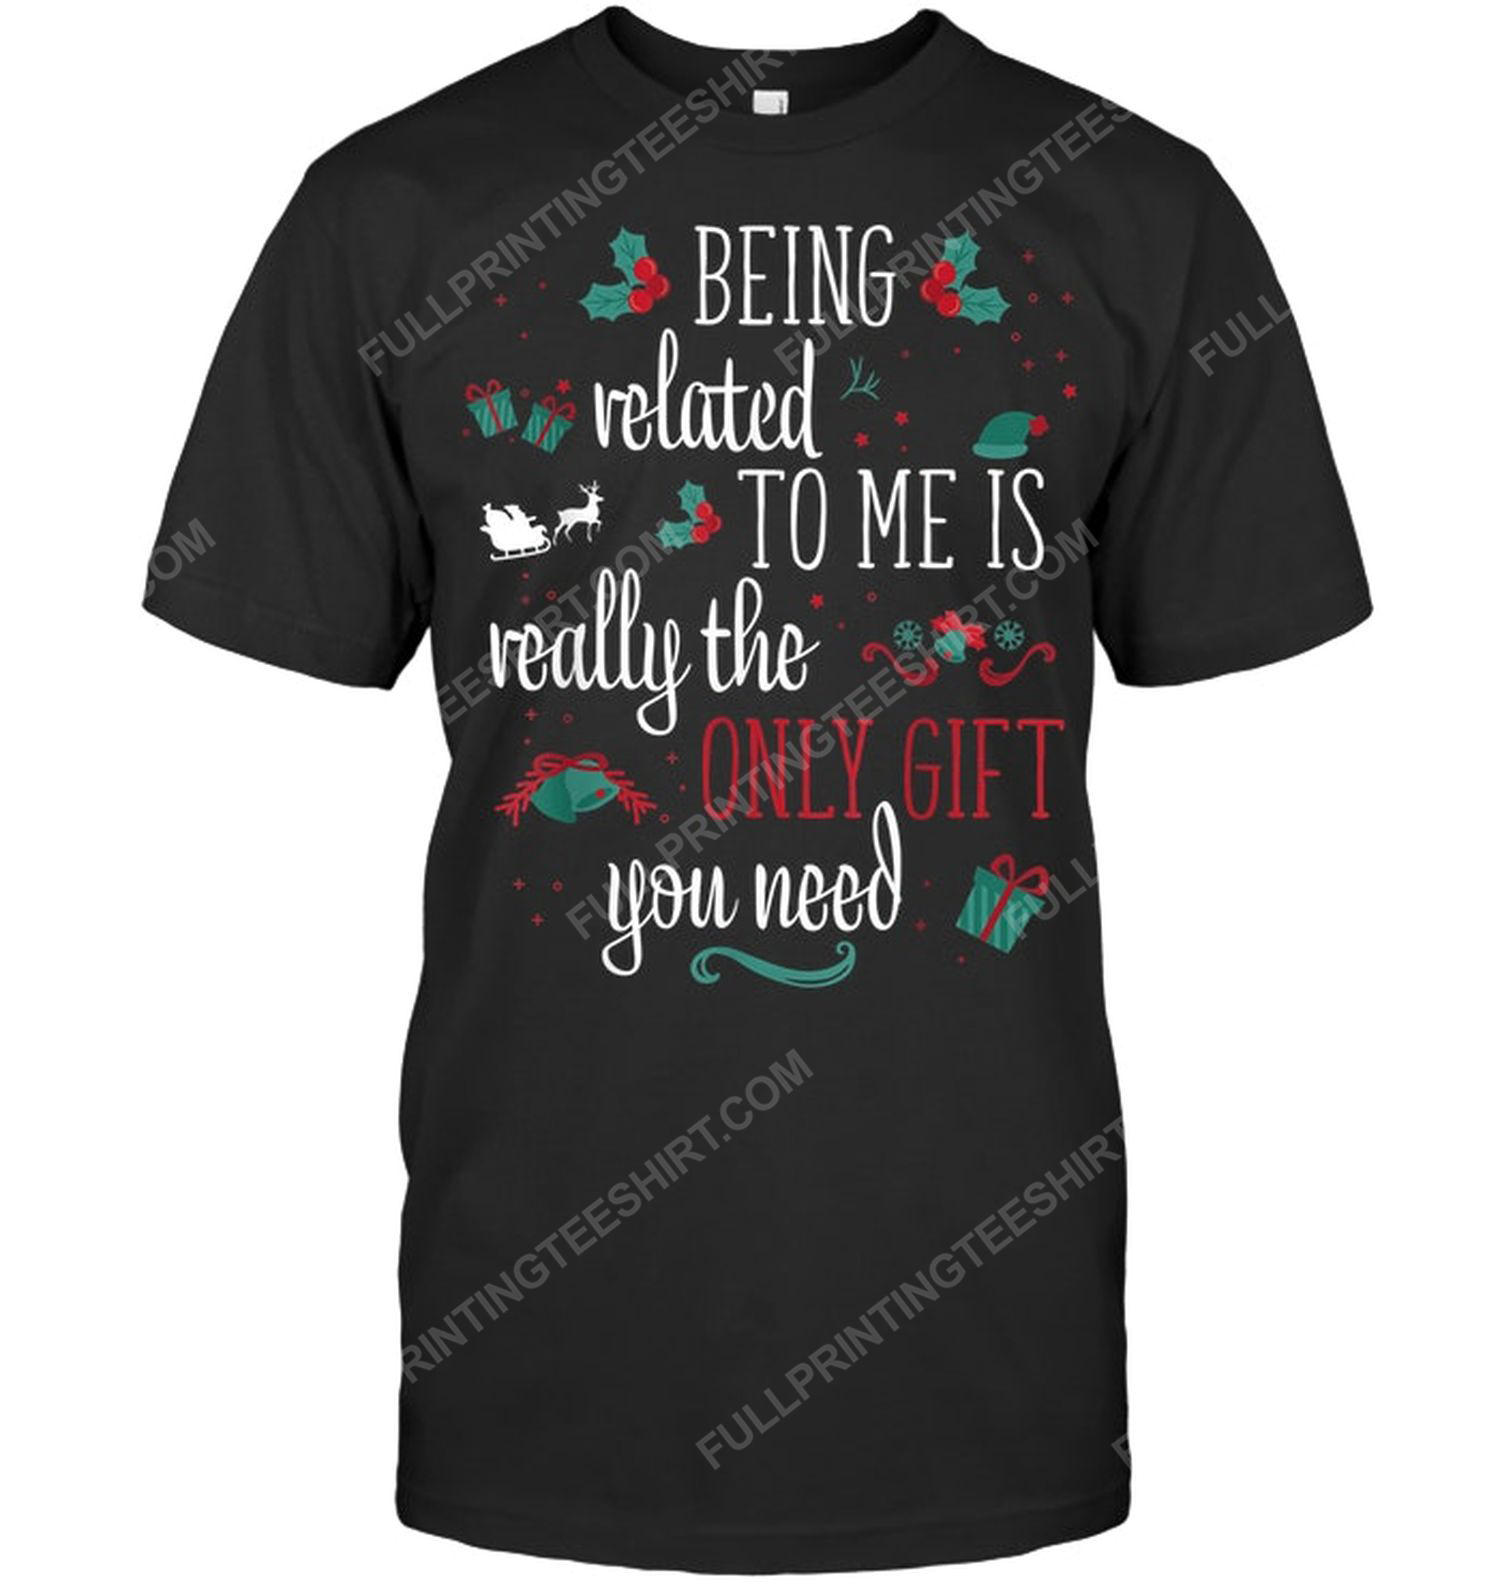 Being related to me is really the only gift you need tshirt